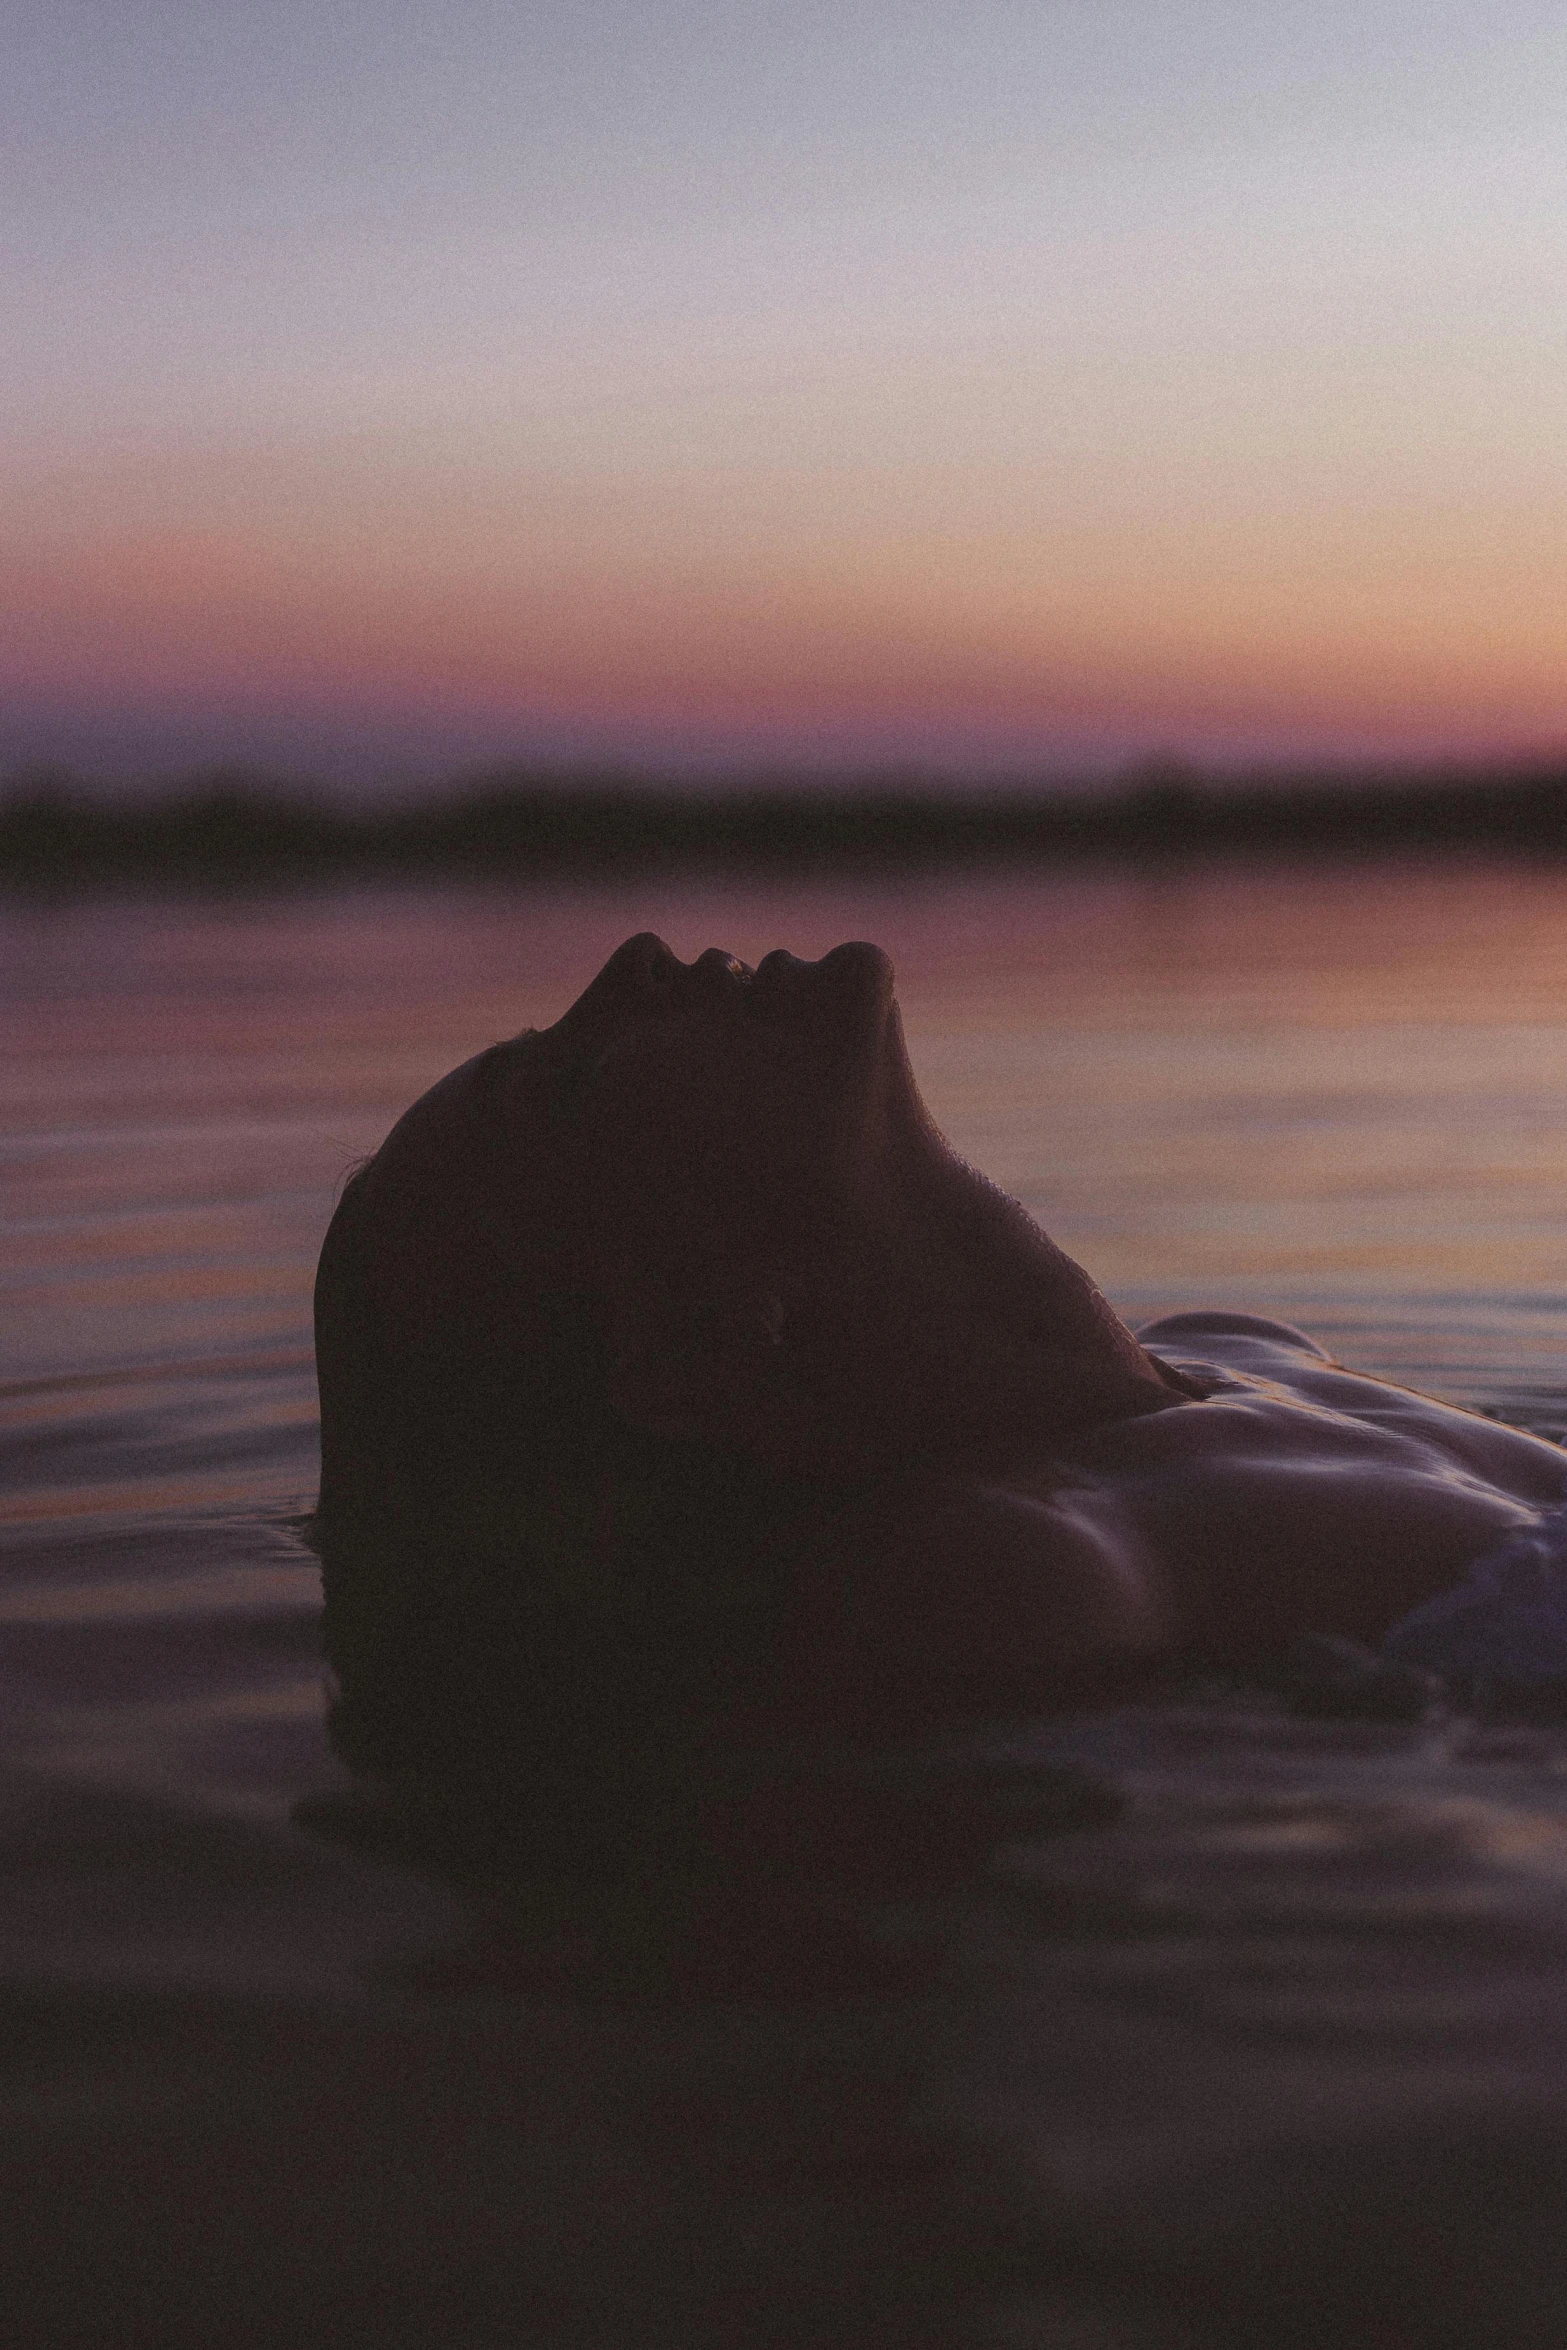 a person is submerged in water at sunset